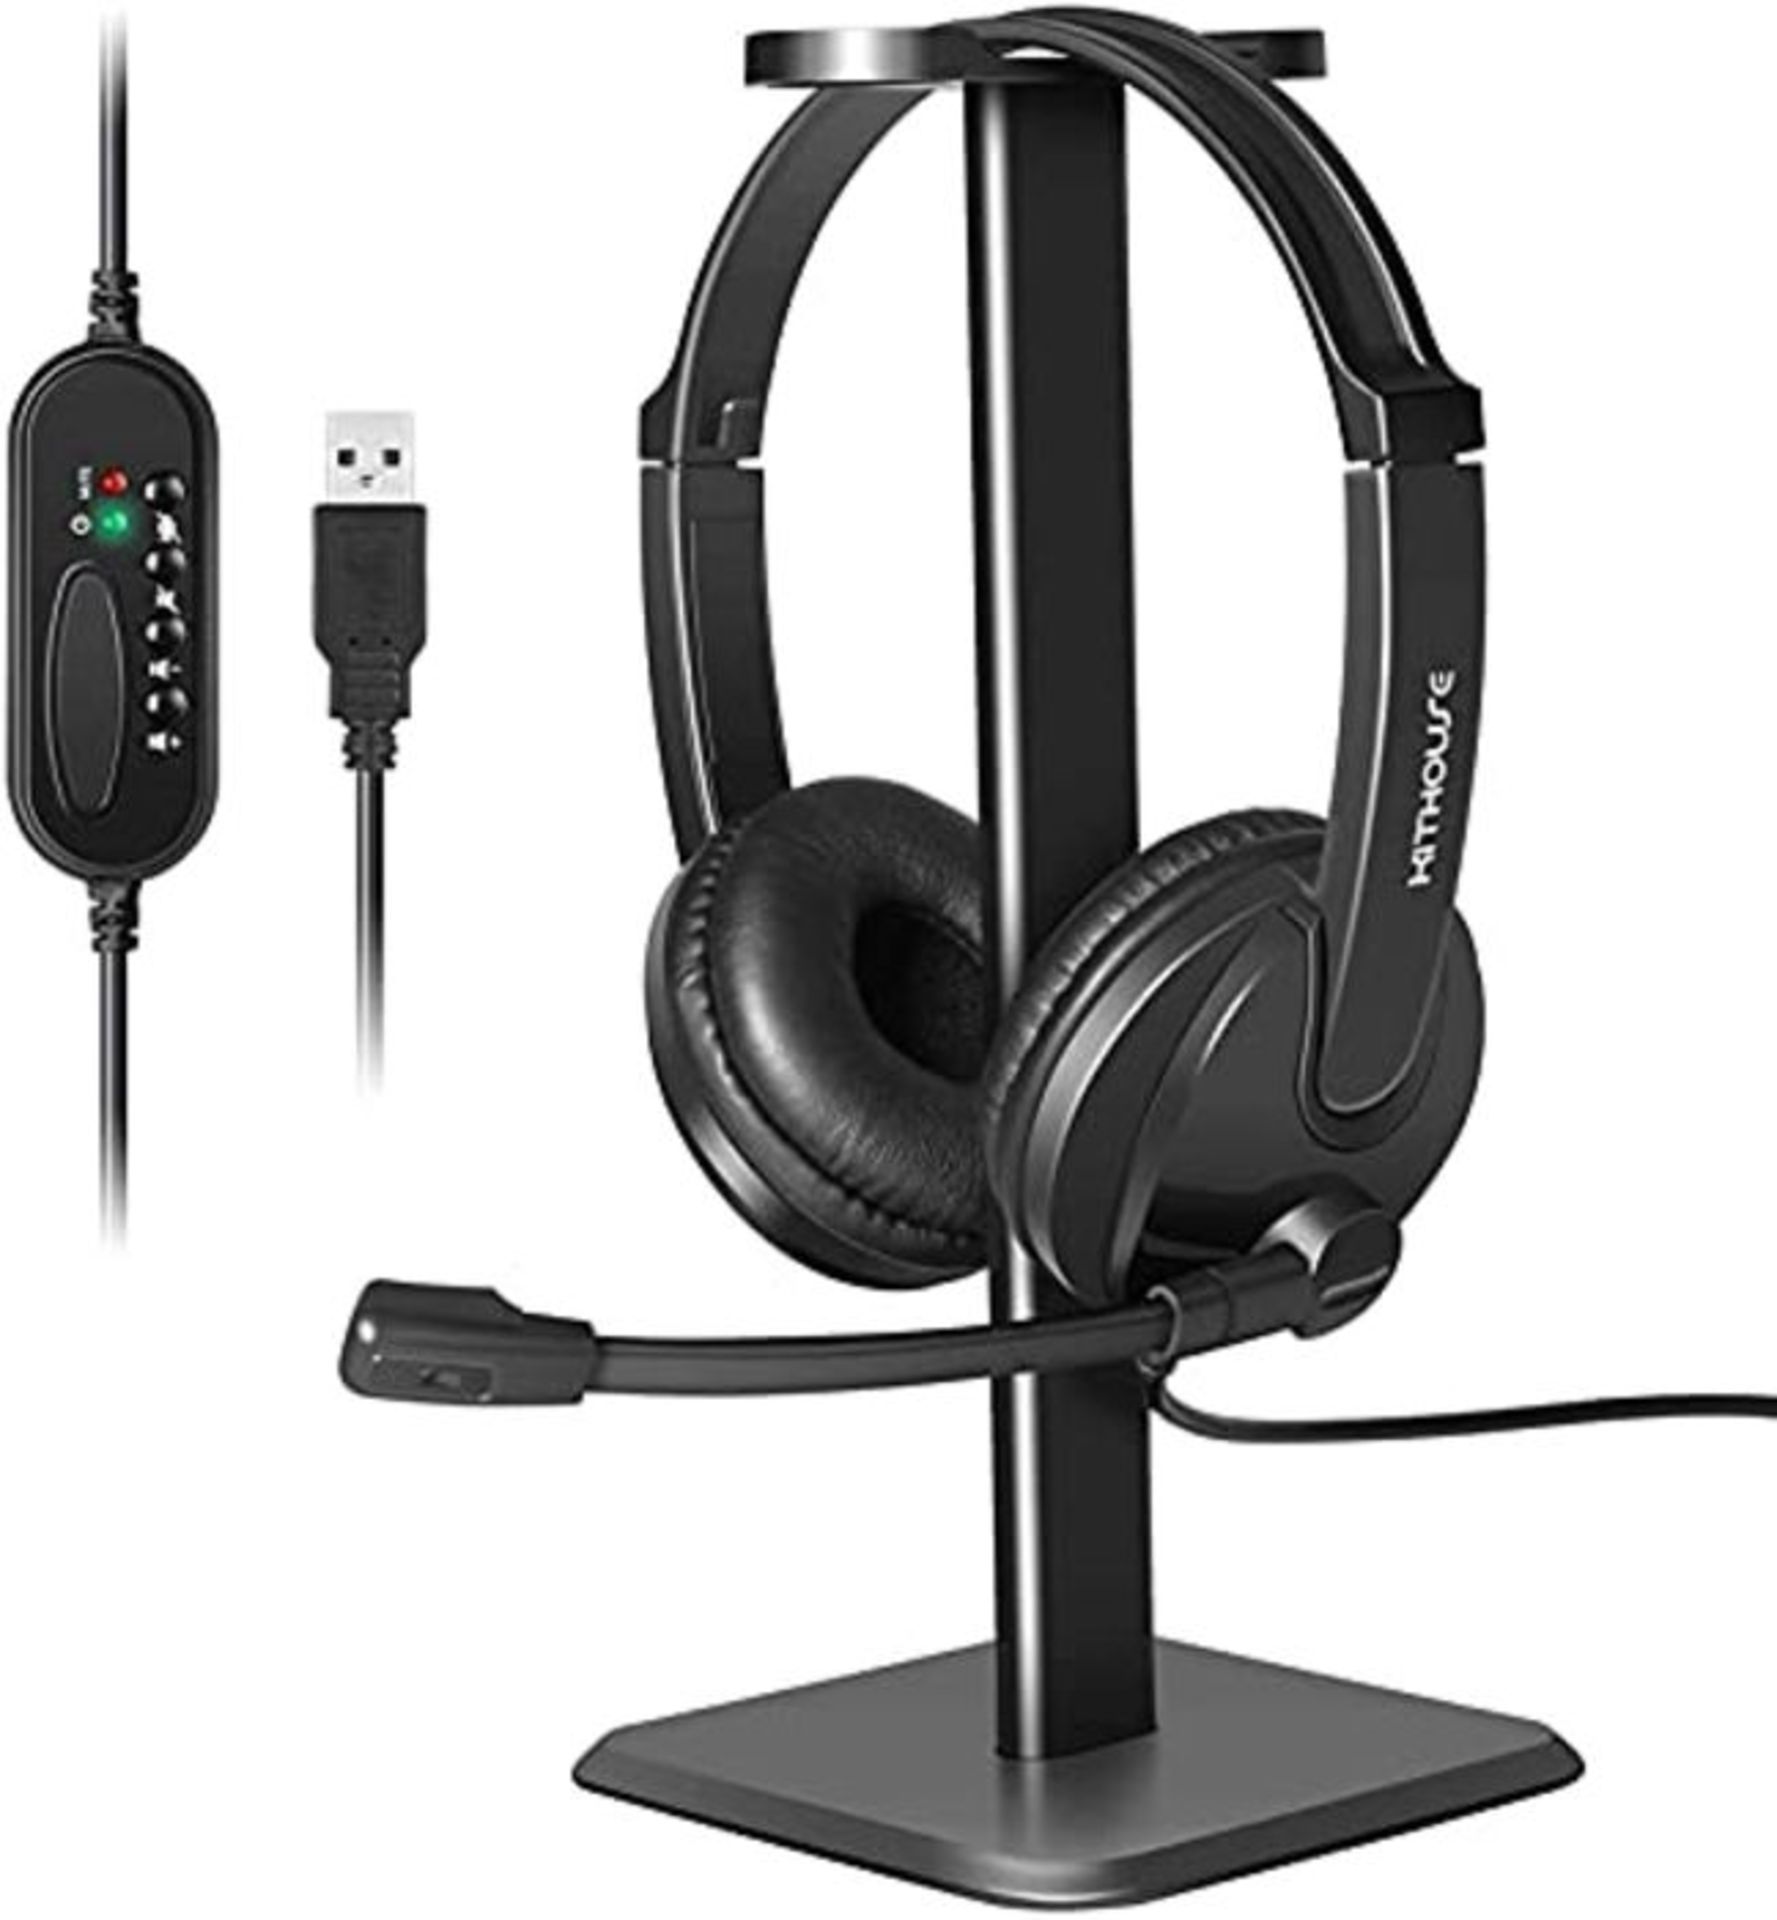 Kithouse PC Headset with Microphone USB Business Office Headset Computer Headphones wi